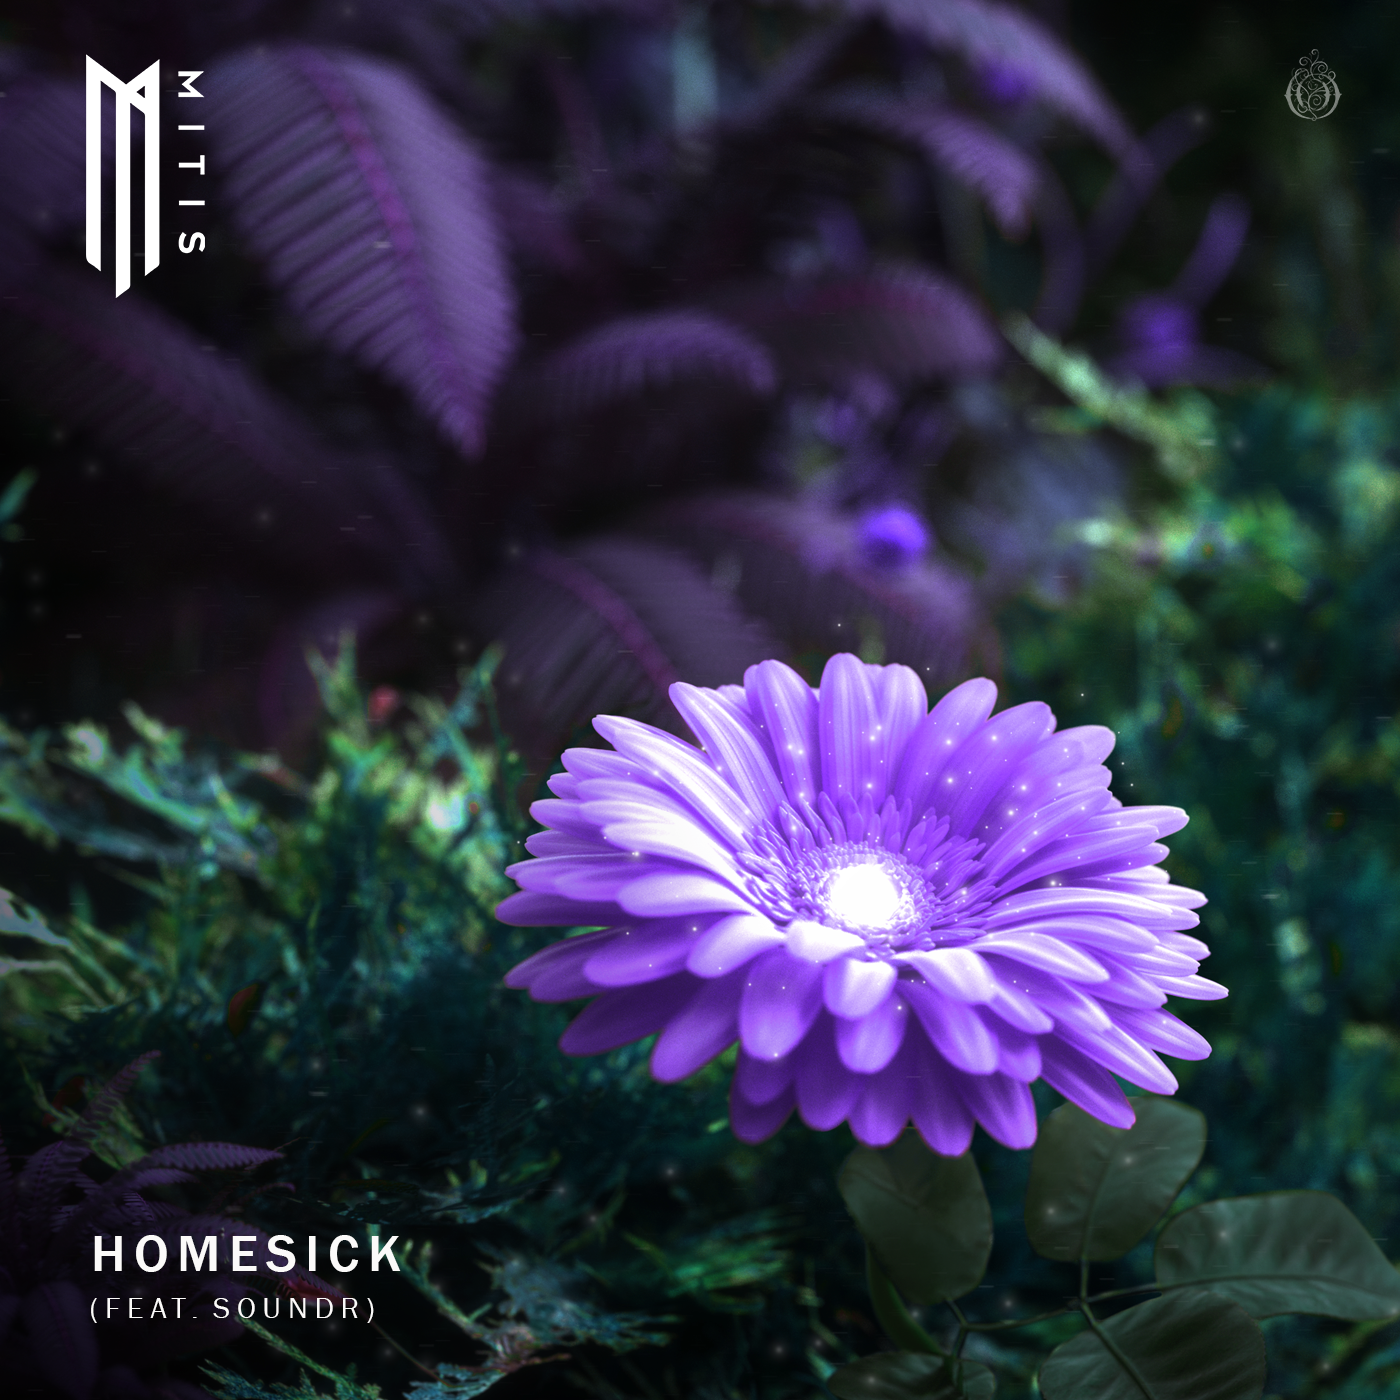 MitiS’ New Single “Homesick” Builds Excitement for Upcoming Project + Giveaway